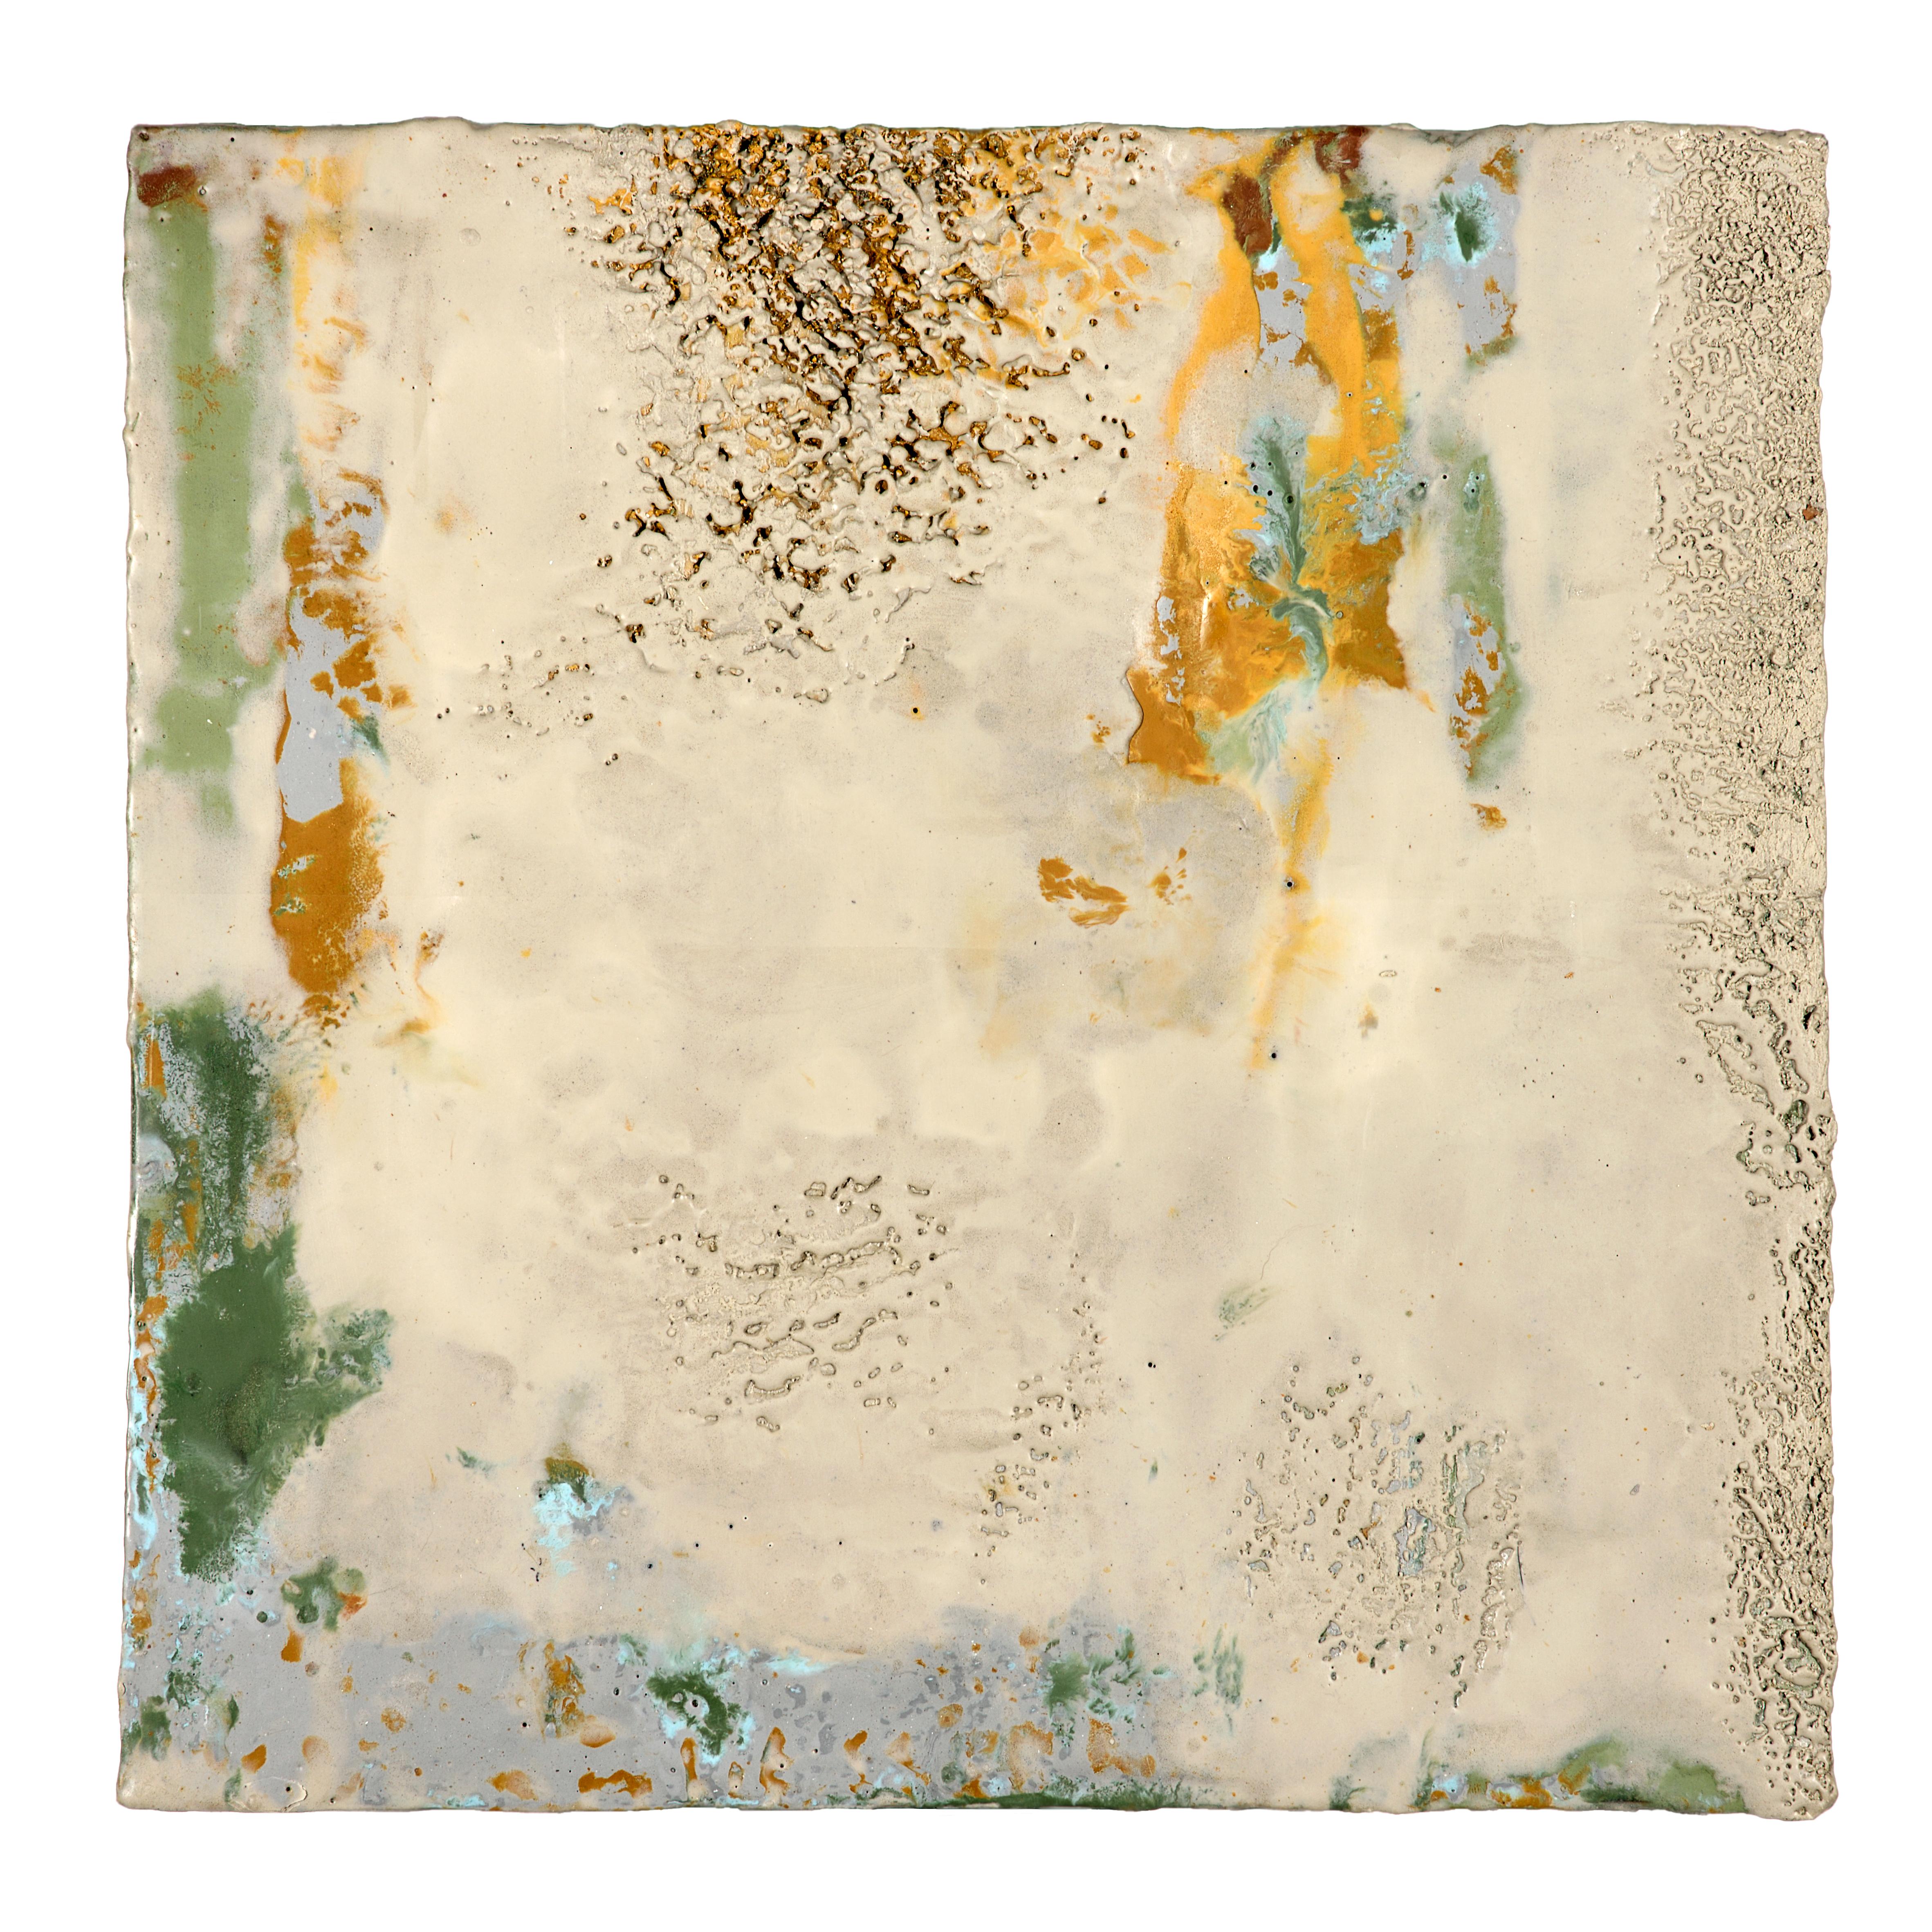 Modern Richard Hirsch Encaustic Painting of Nothing #62, 2020 For Sale